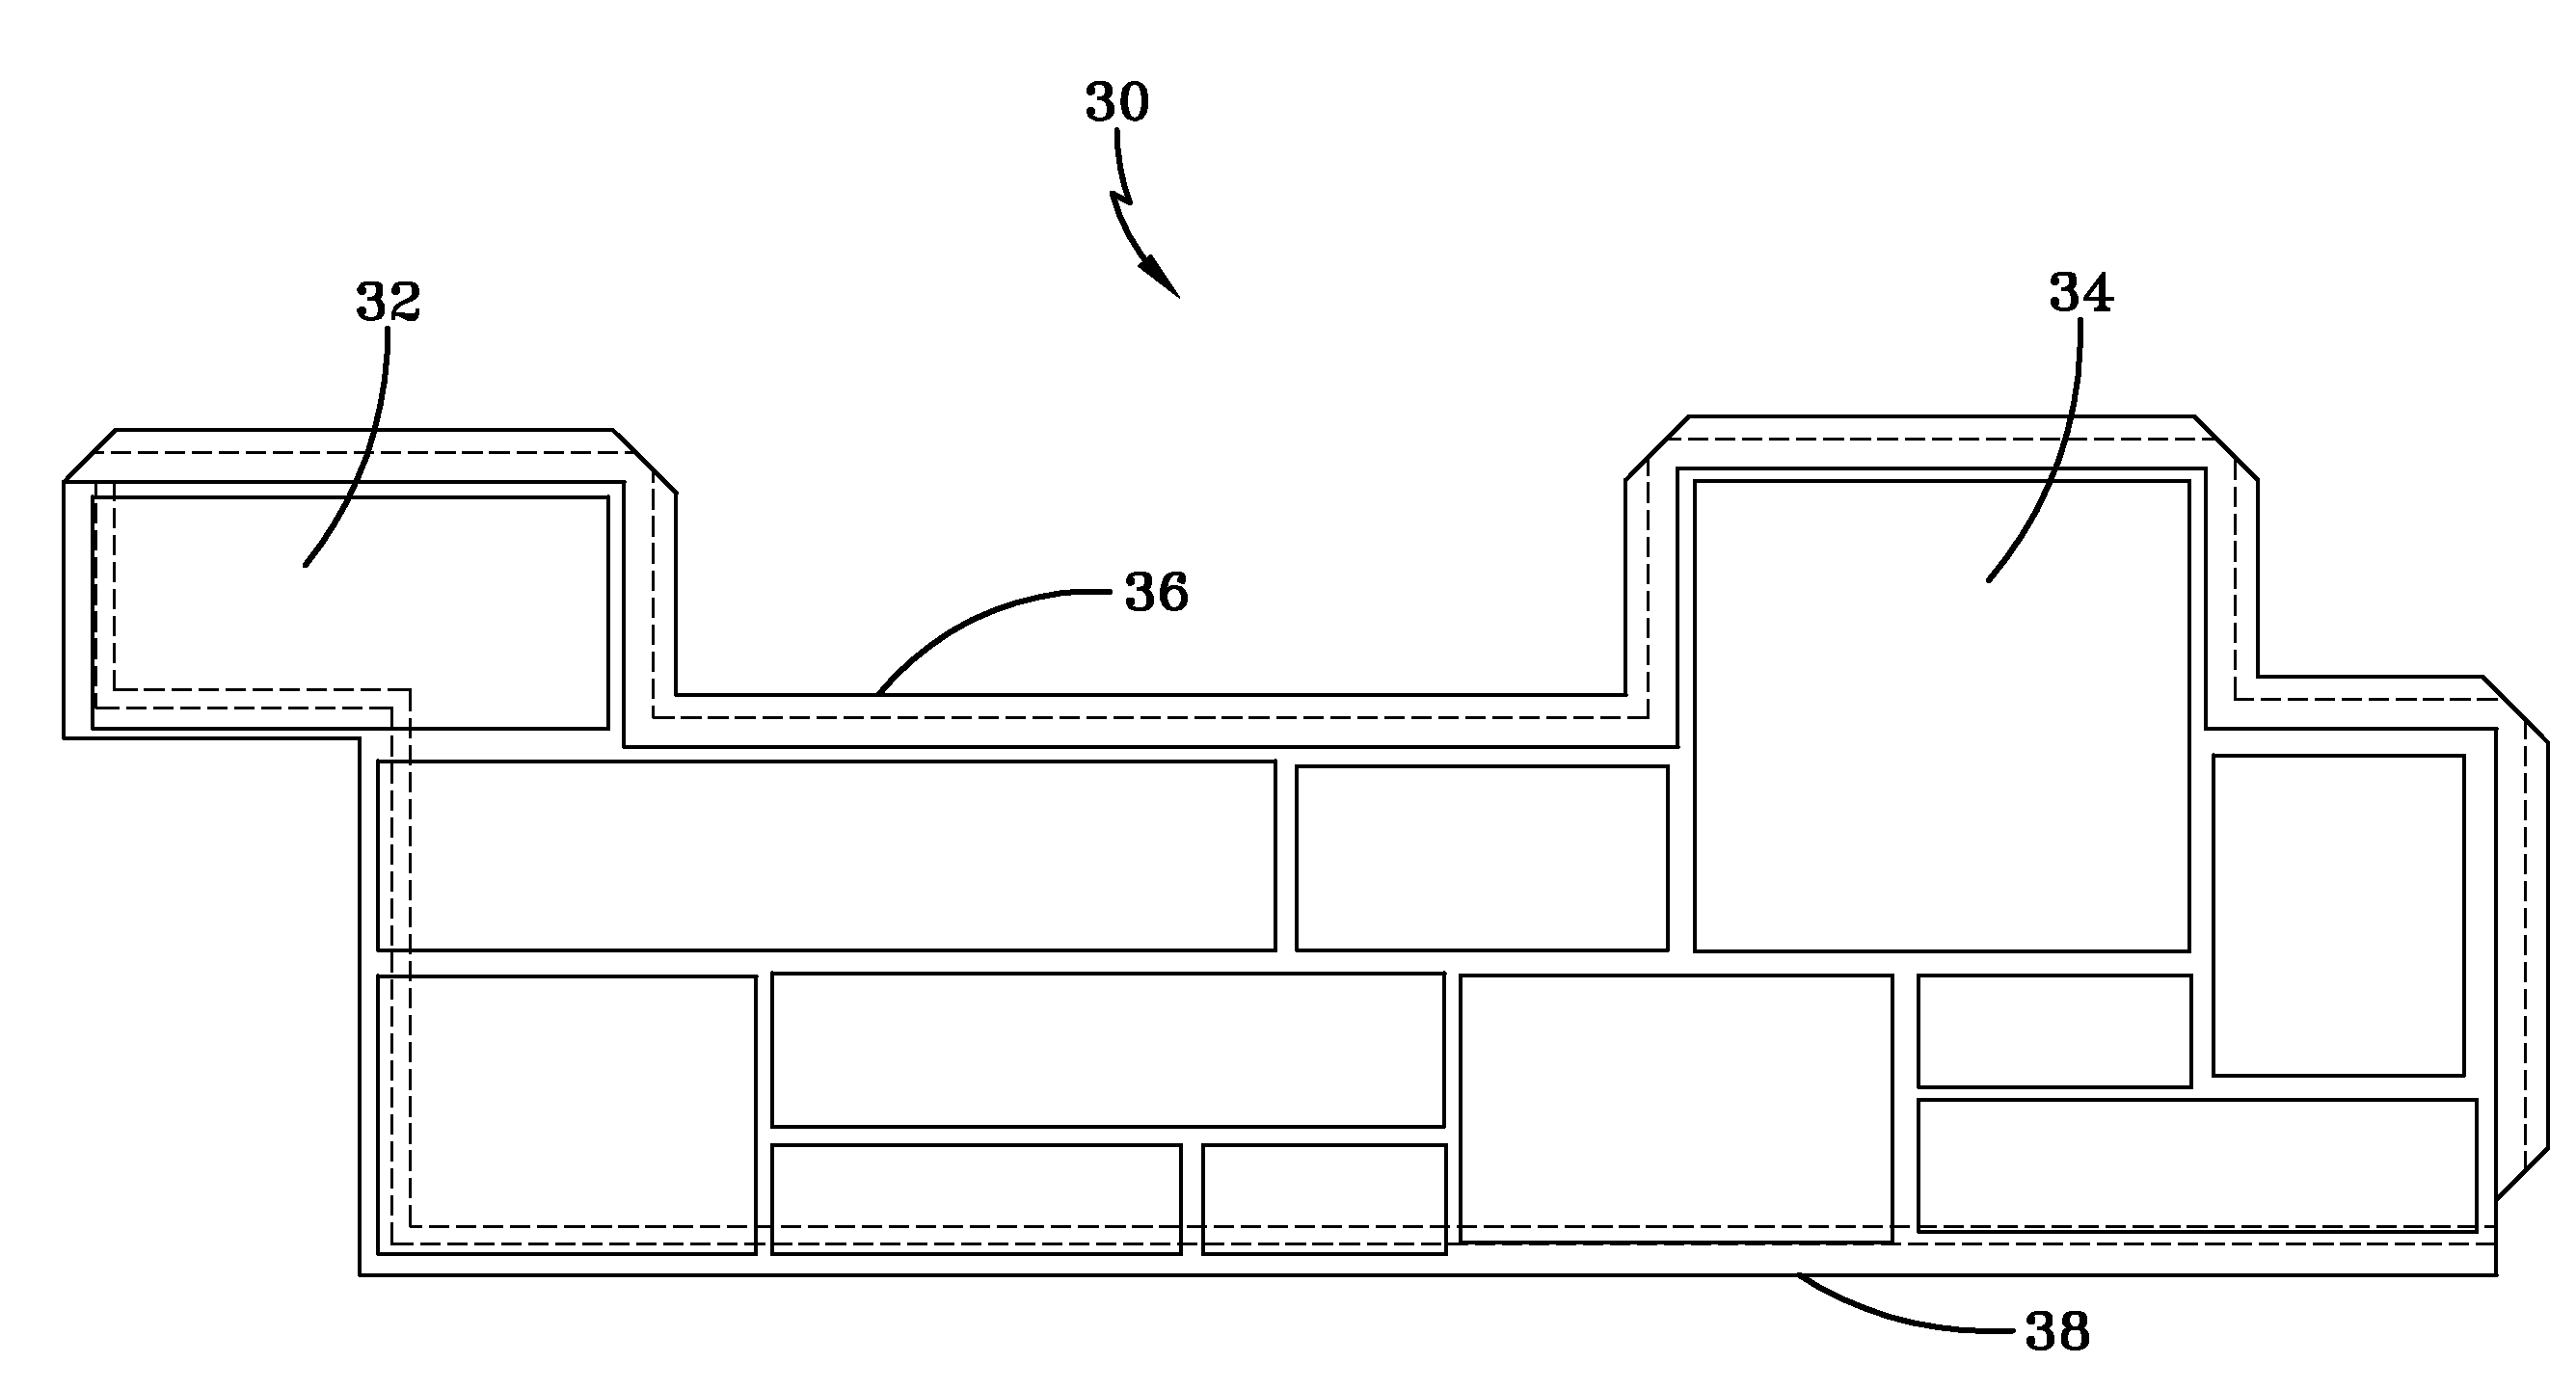 Composition of fillers with plastics for producing superior building materials